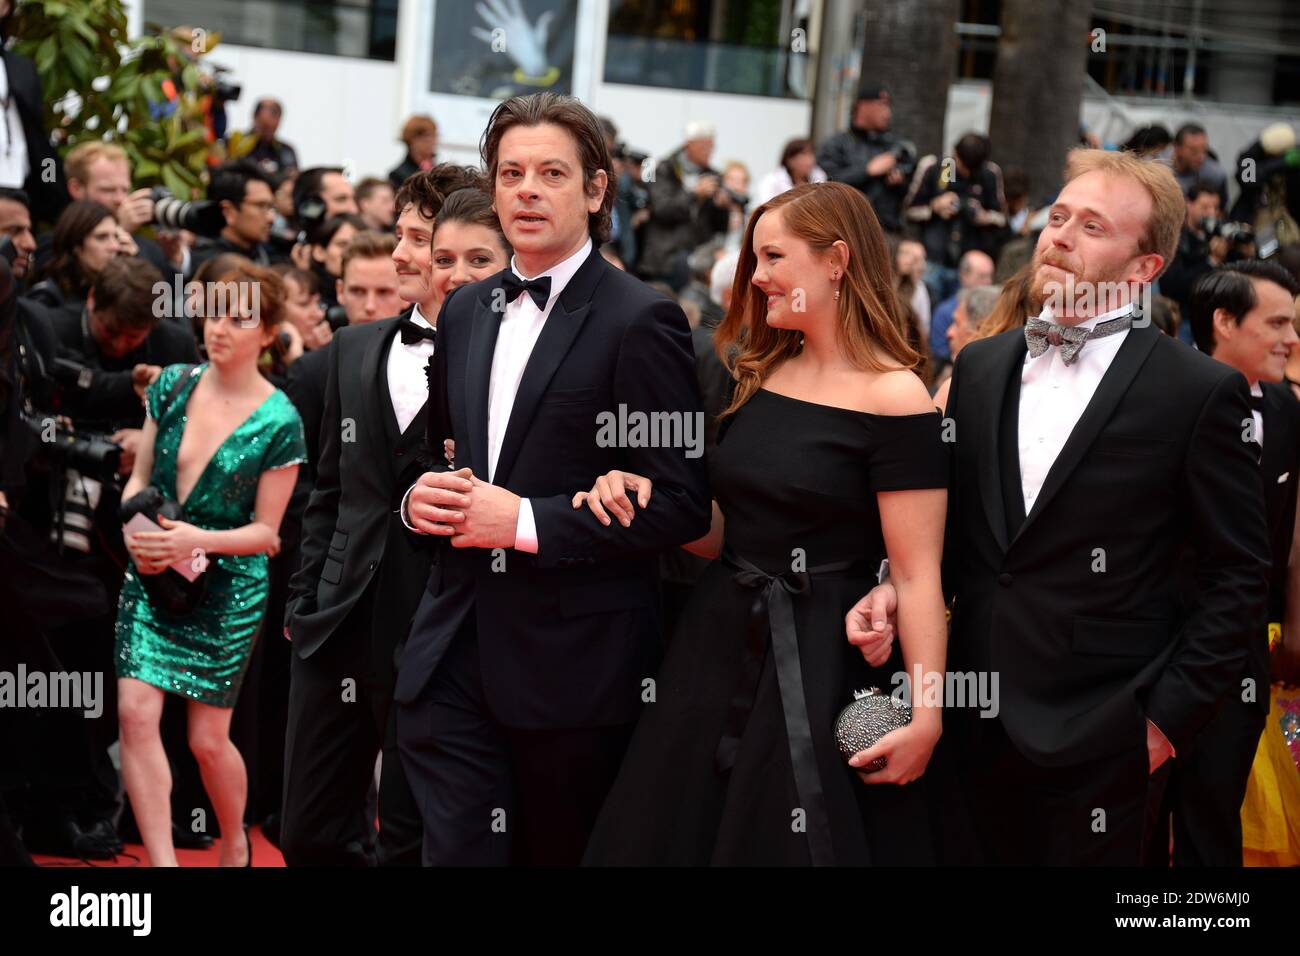 Benjamin Biolay and Barbara Probst arriving at the The Foxcatcher screening held at the Palais Des Festivals in Cannes, France on May 19, 2014, as part of the 67th Cannes Film Festival. Photo by Nicolas Briquet/ABACAPRESS.COM Stock Photo